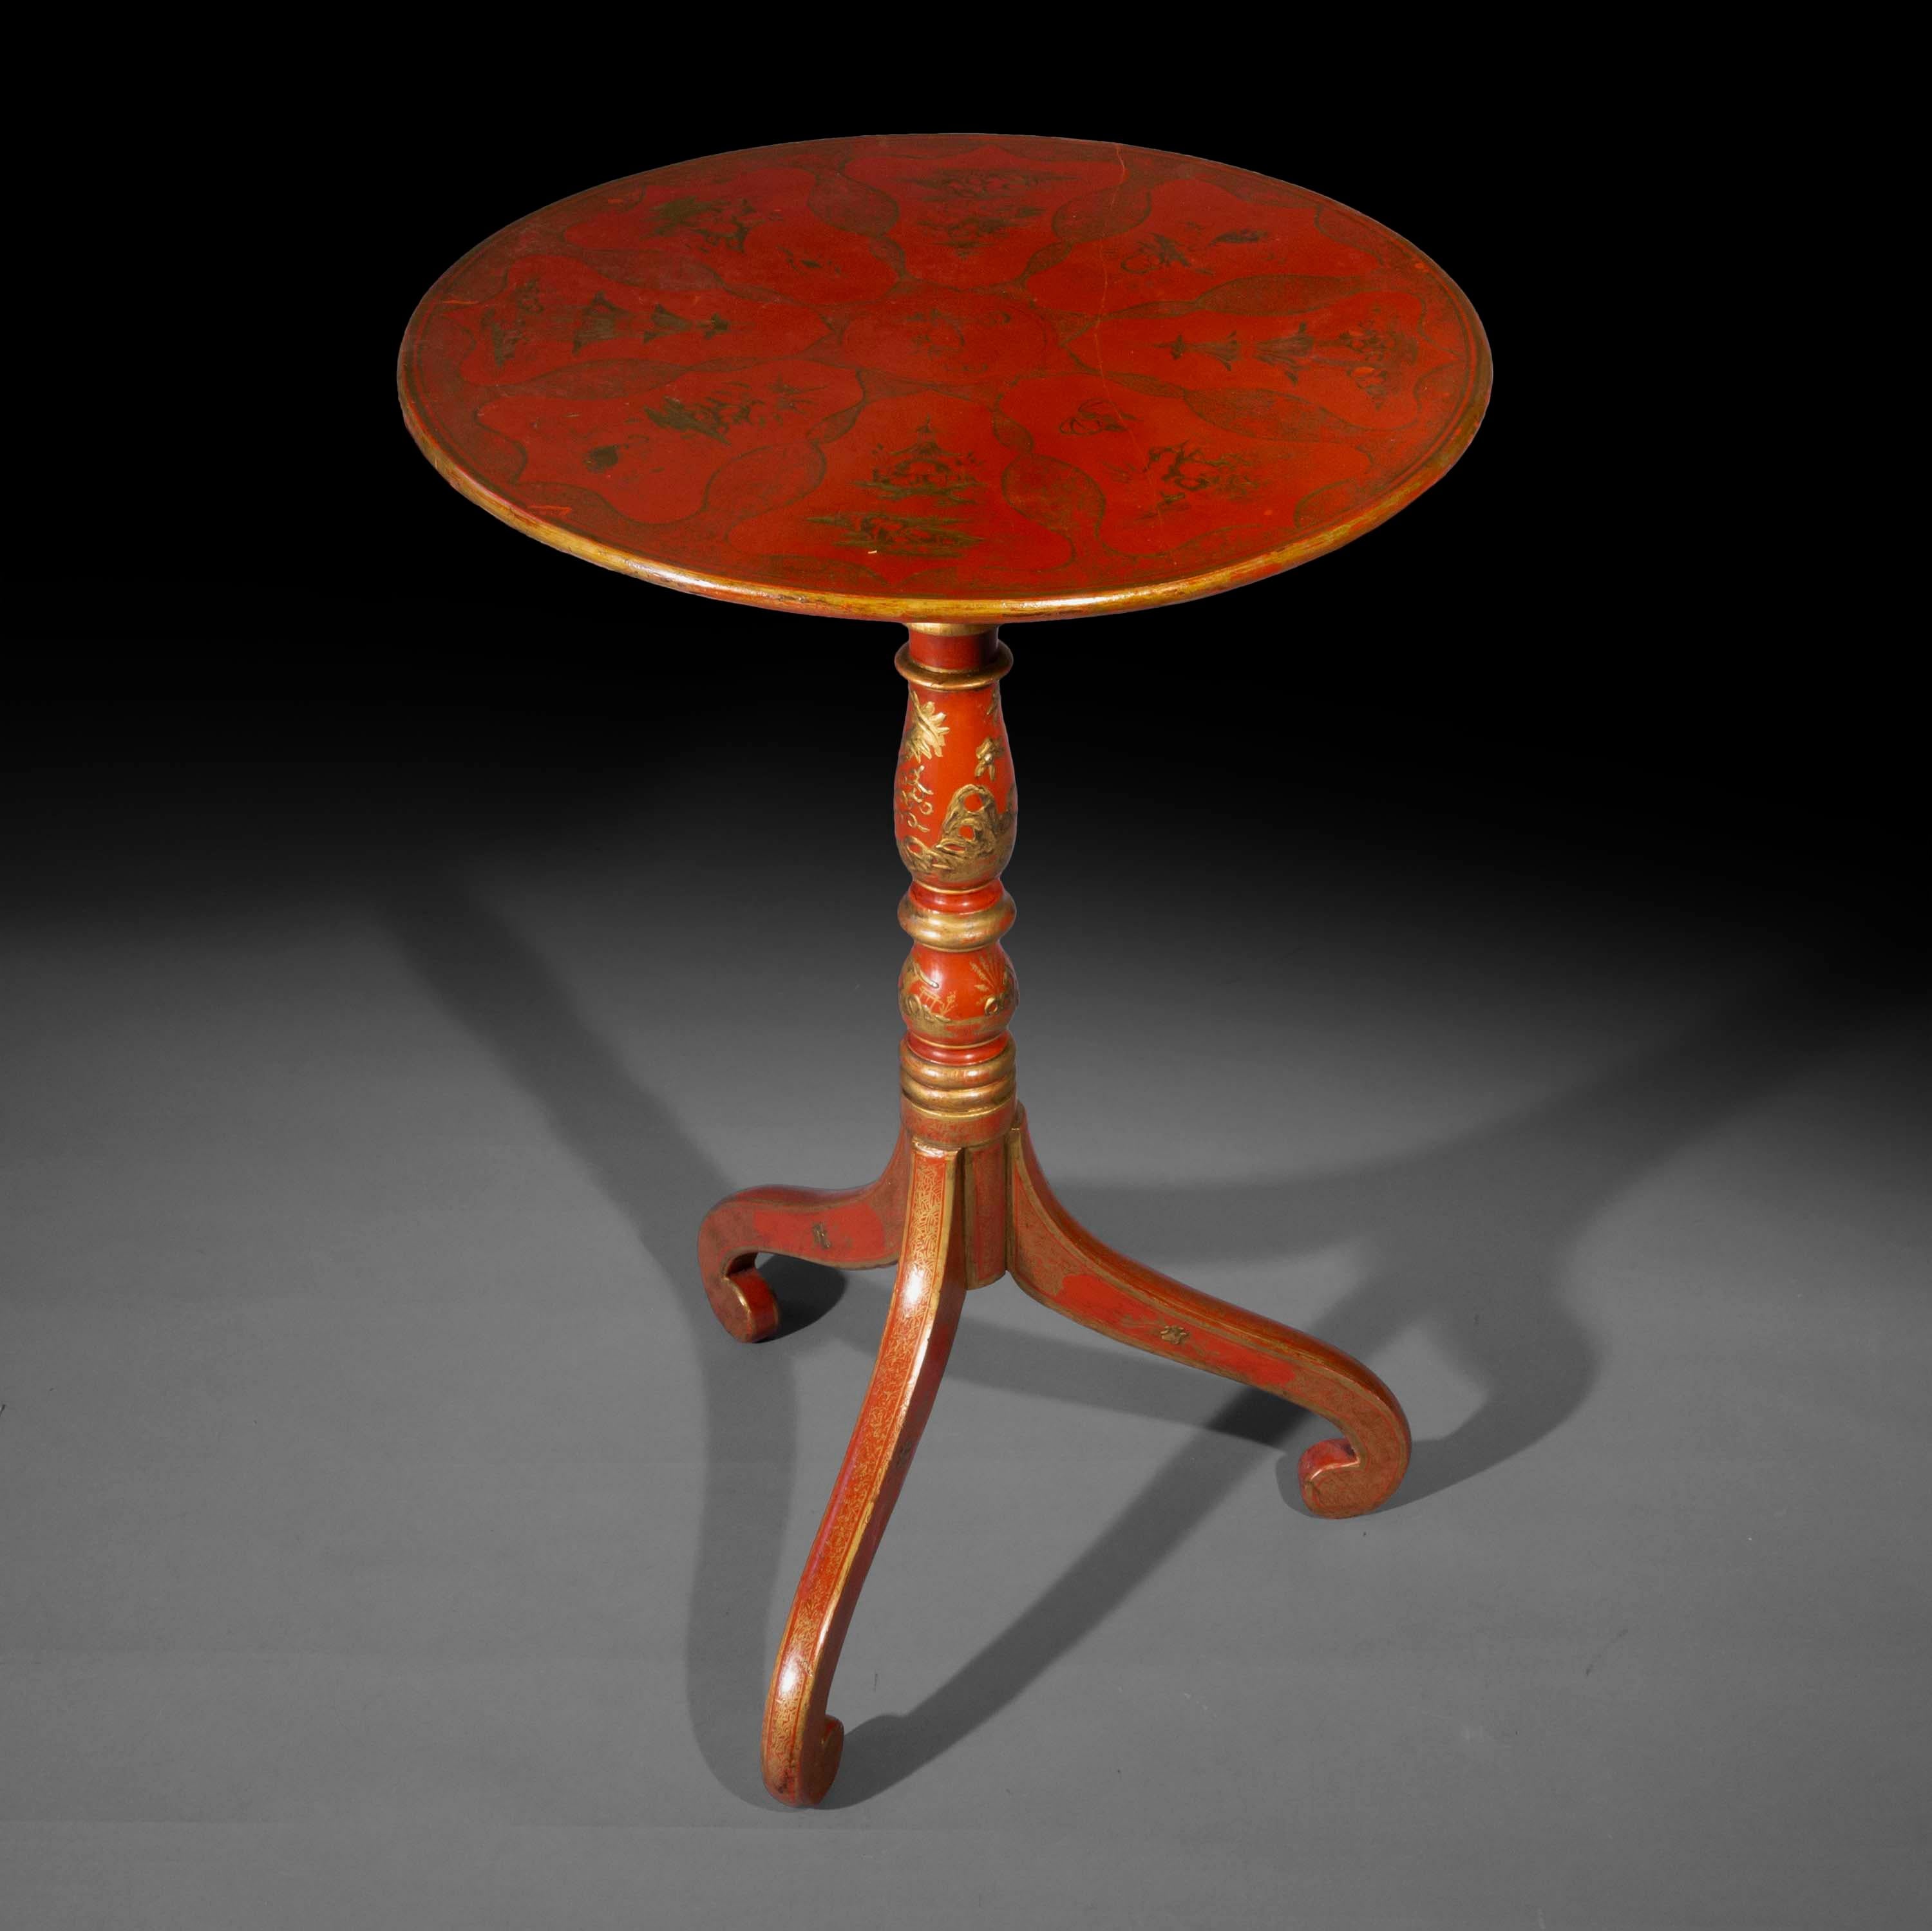 19th Century Antique Chinoiserie Lamp Table with Hand-Painted Red Lacquer